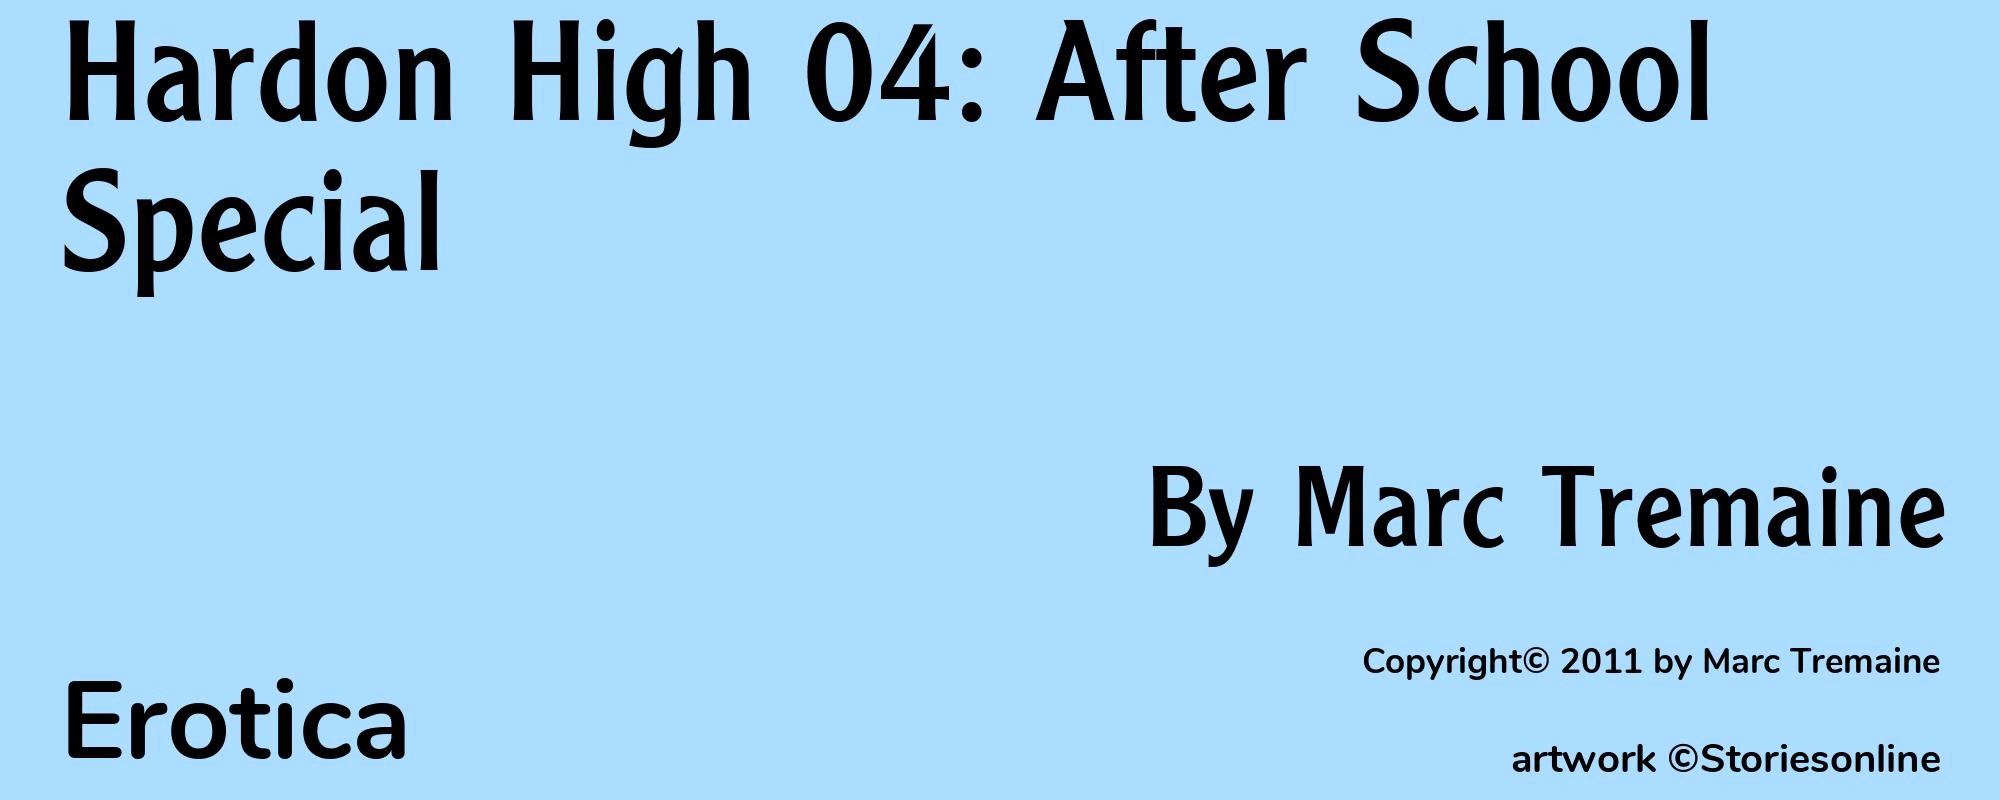 Hardon High 04: After School Special - Cover